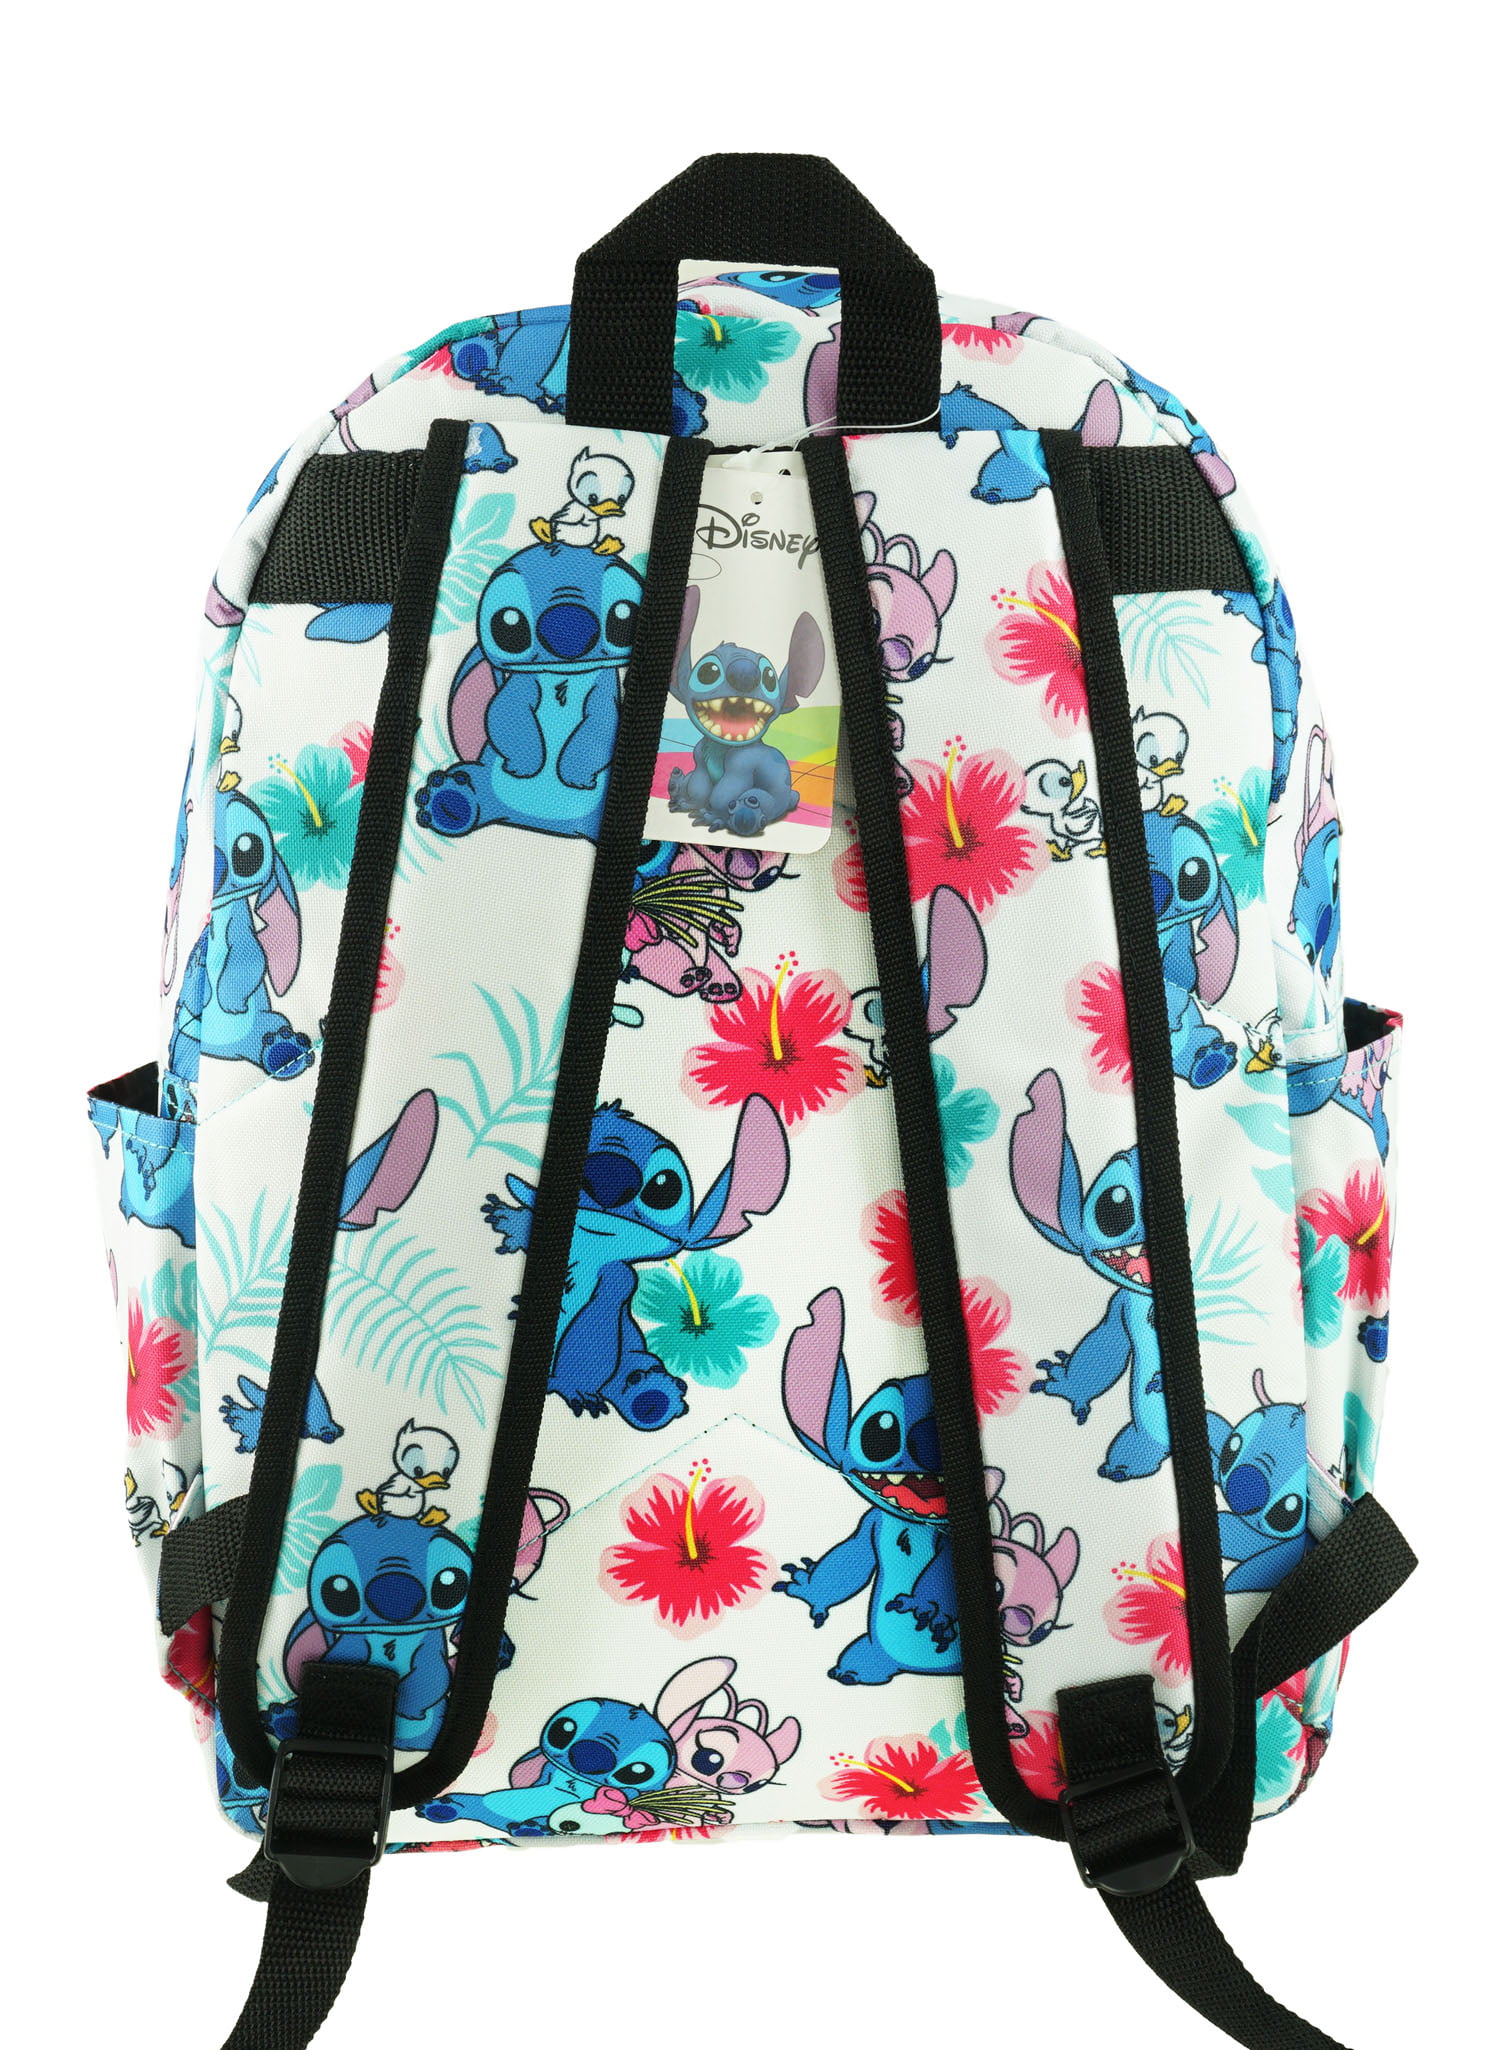 Disney Lilo Stitch Large 16" School Backpack All Over Print